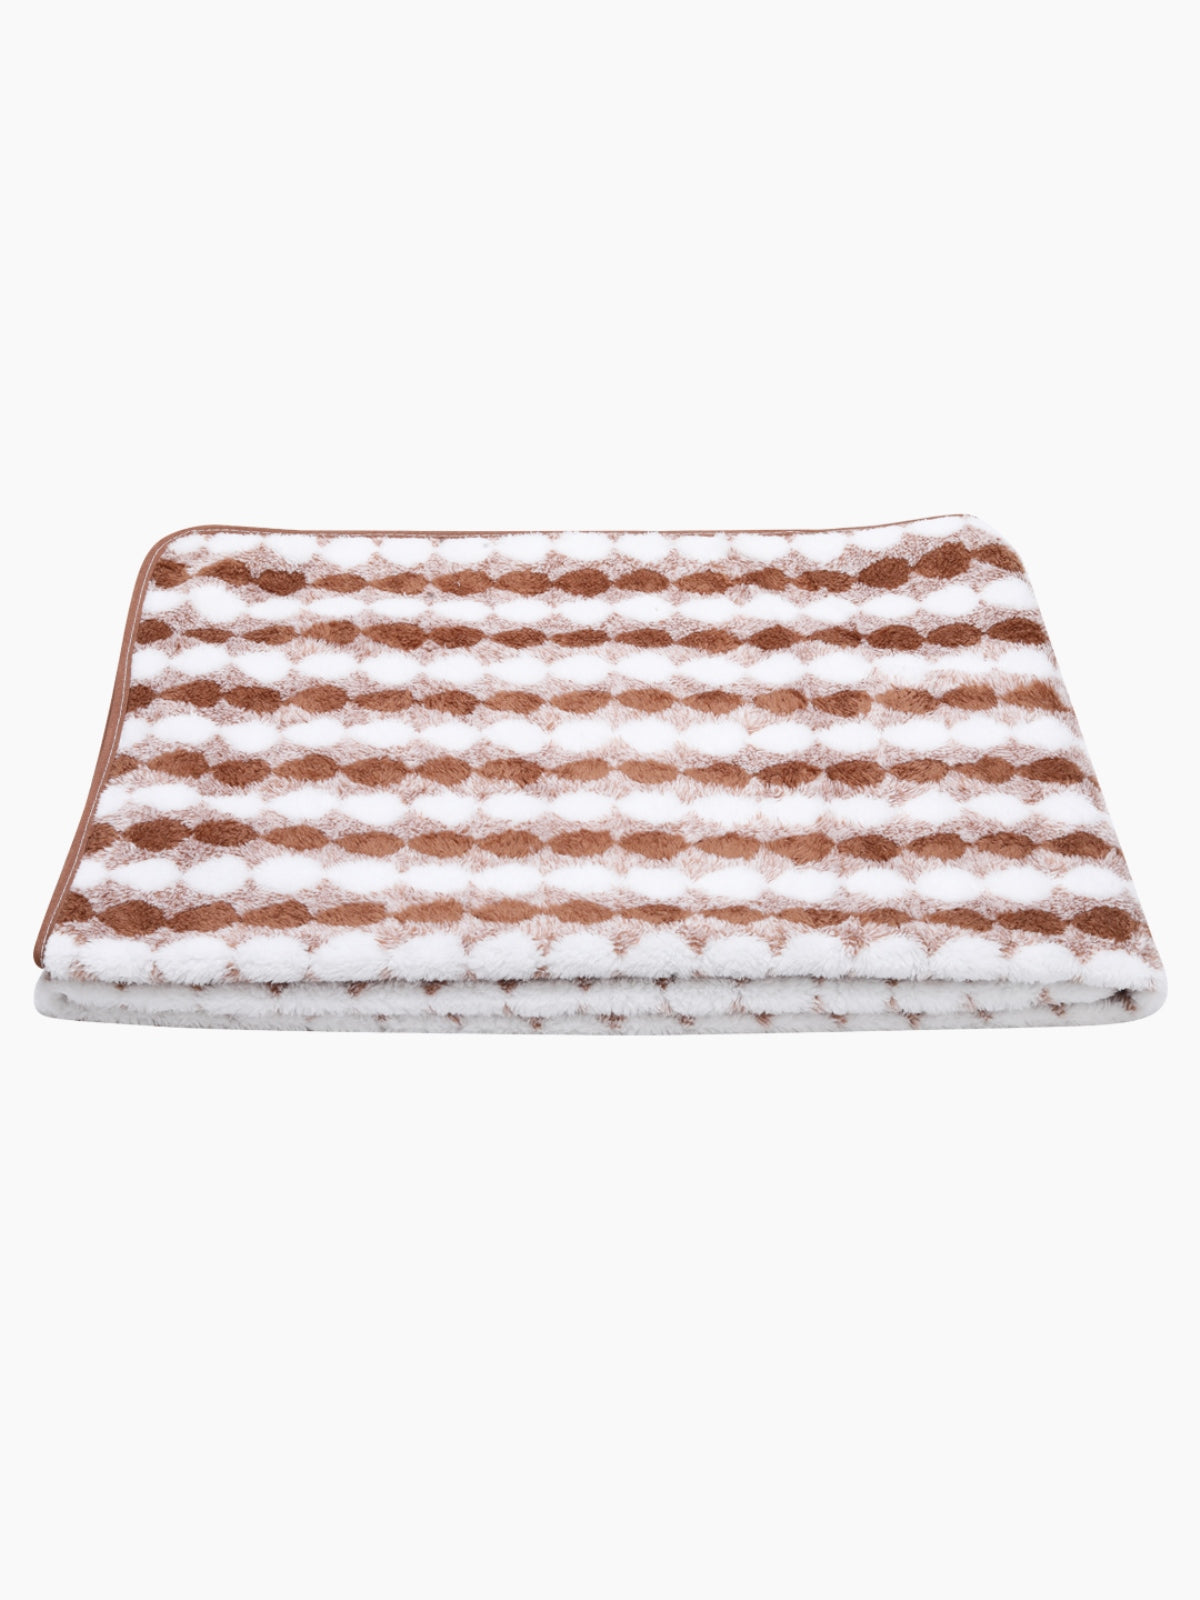 Set of 3 Brown & White Solid Microfiber Towels